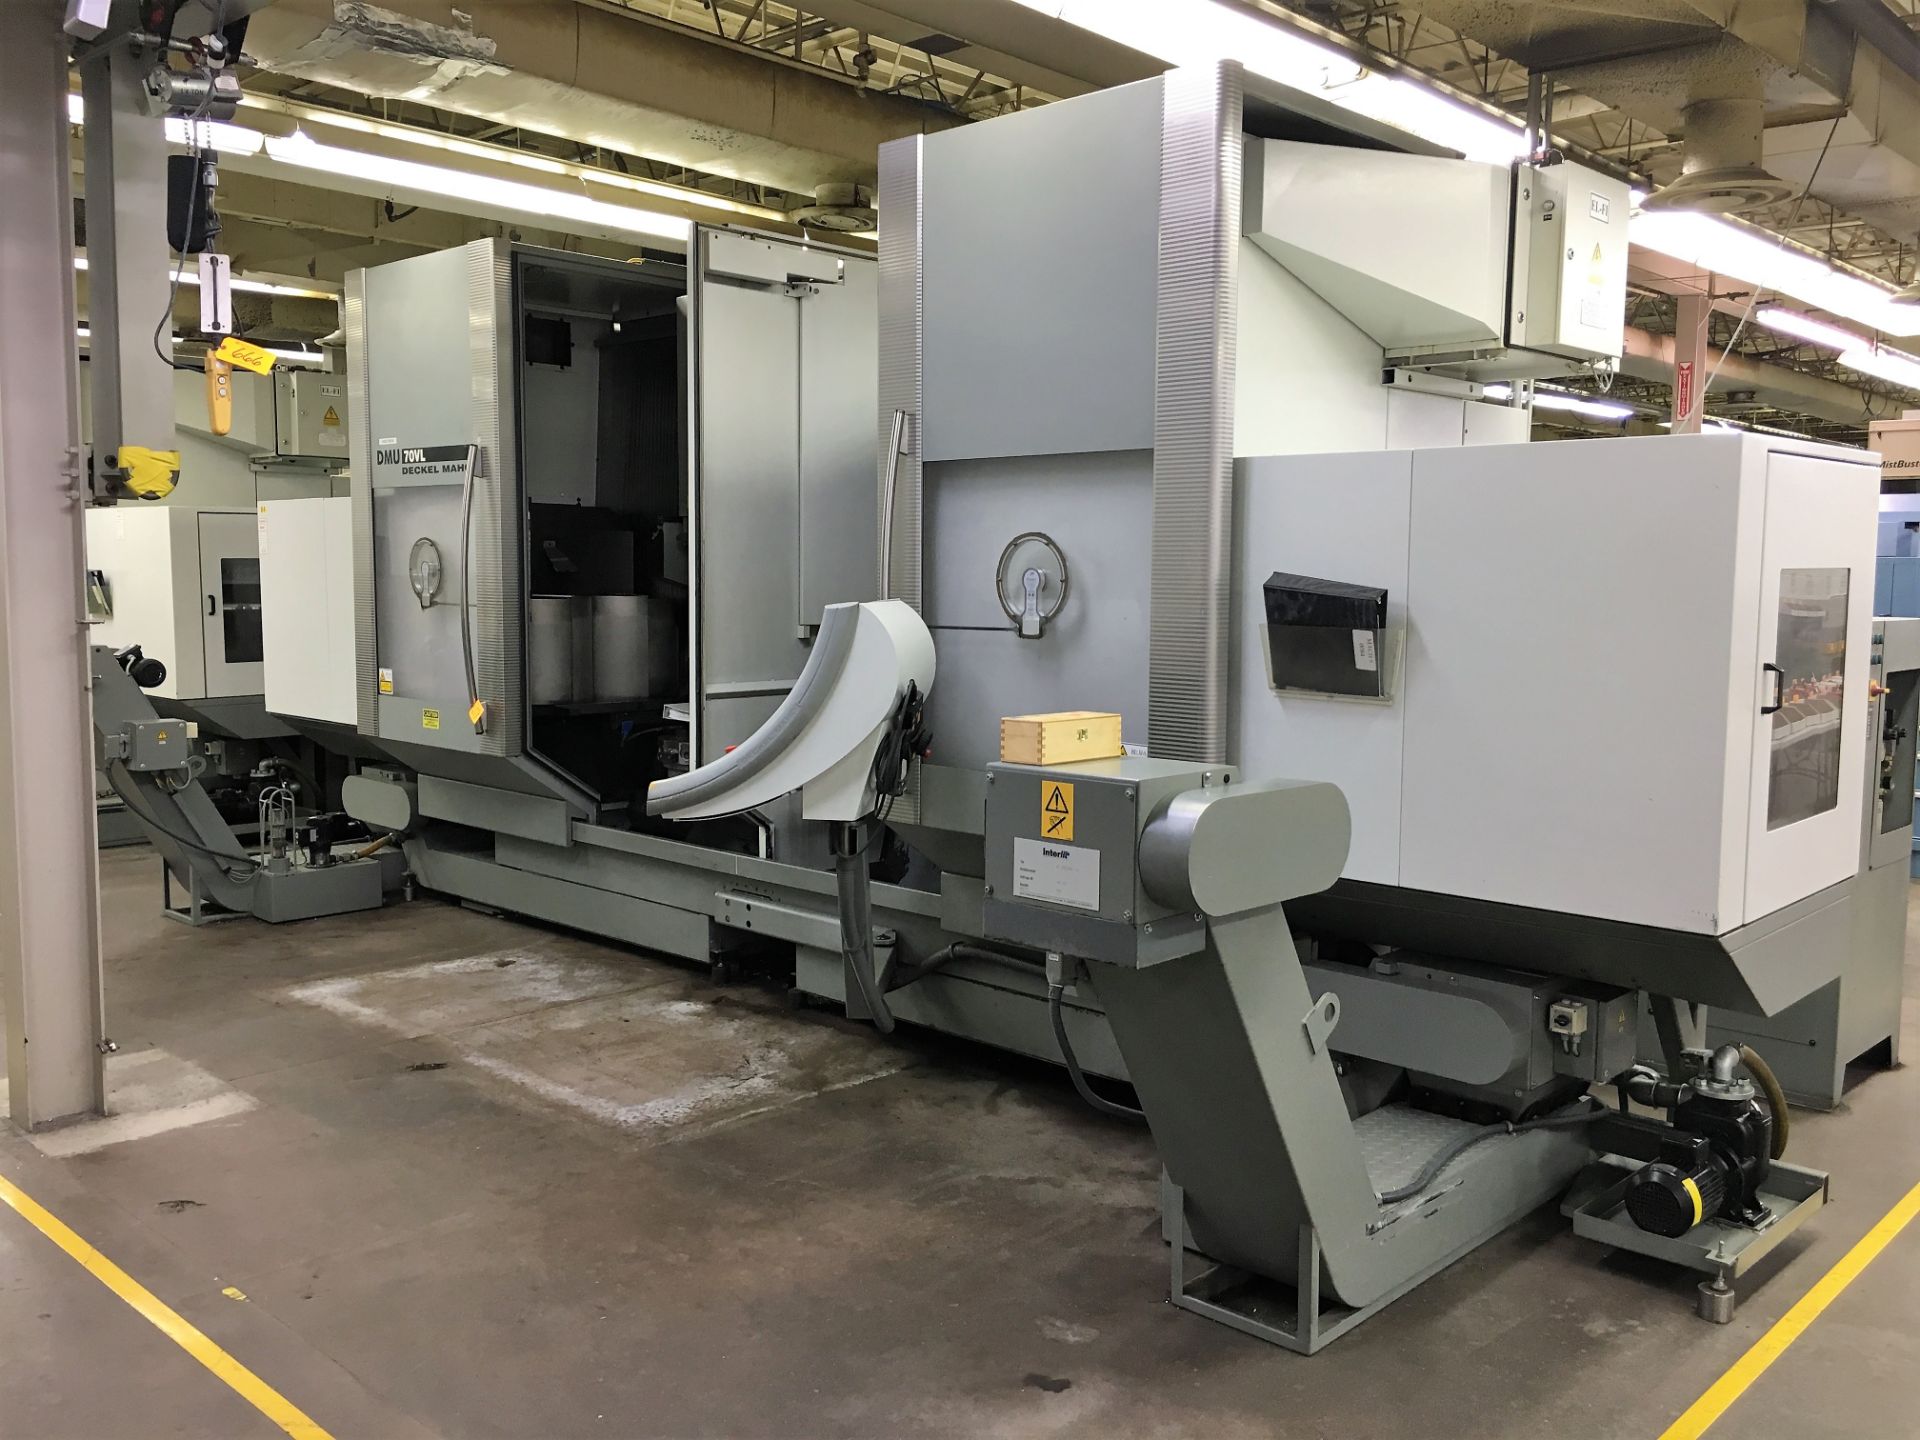 DECKEL-MAHO # DMU-70-VL ''FULL-5-AXIS'' CNC ''TWIN-CNC ROTARY TABLE'' VERTICAL MACHINING CENTER WITH - Image 5 of 7